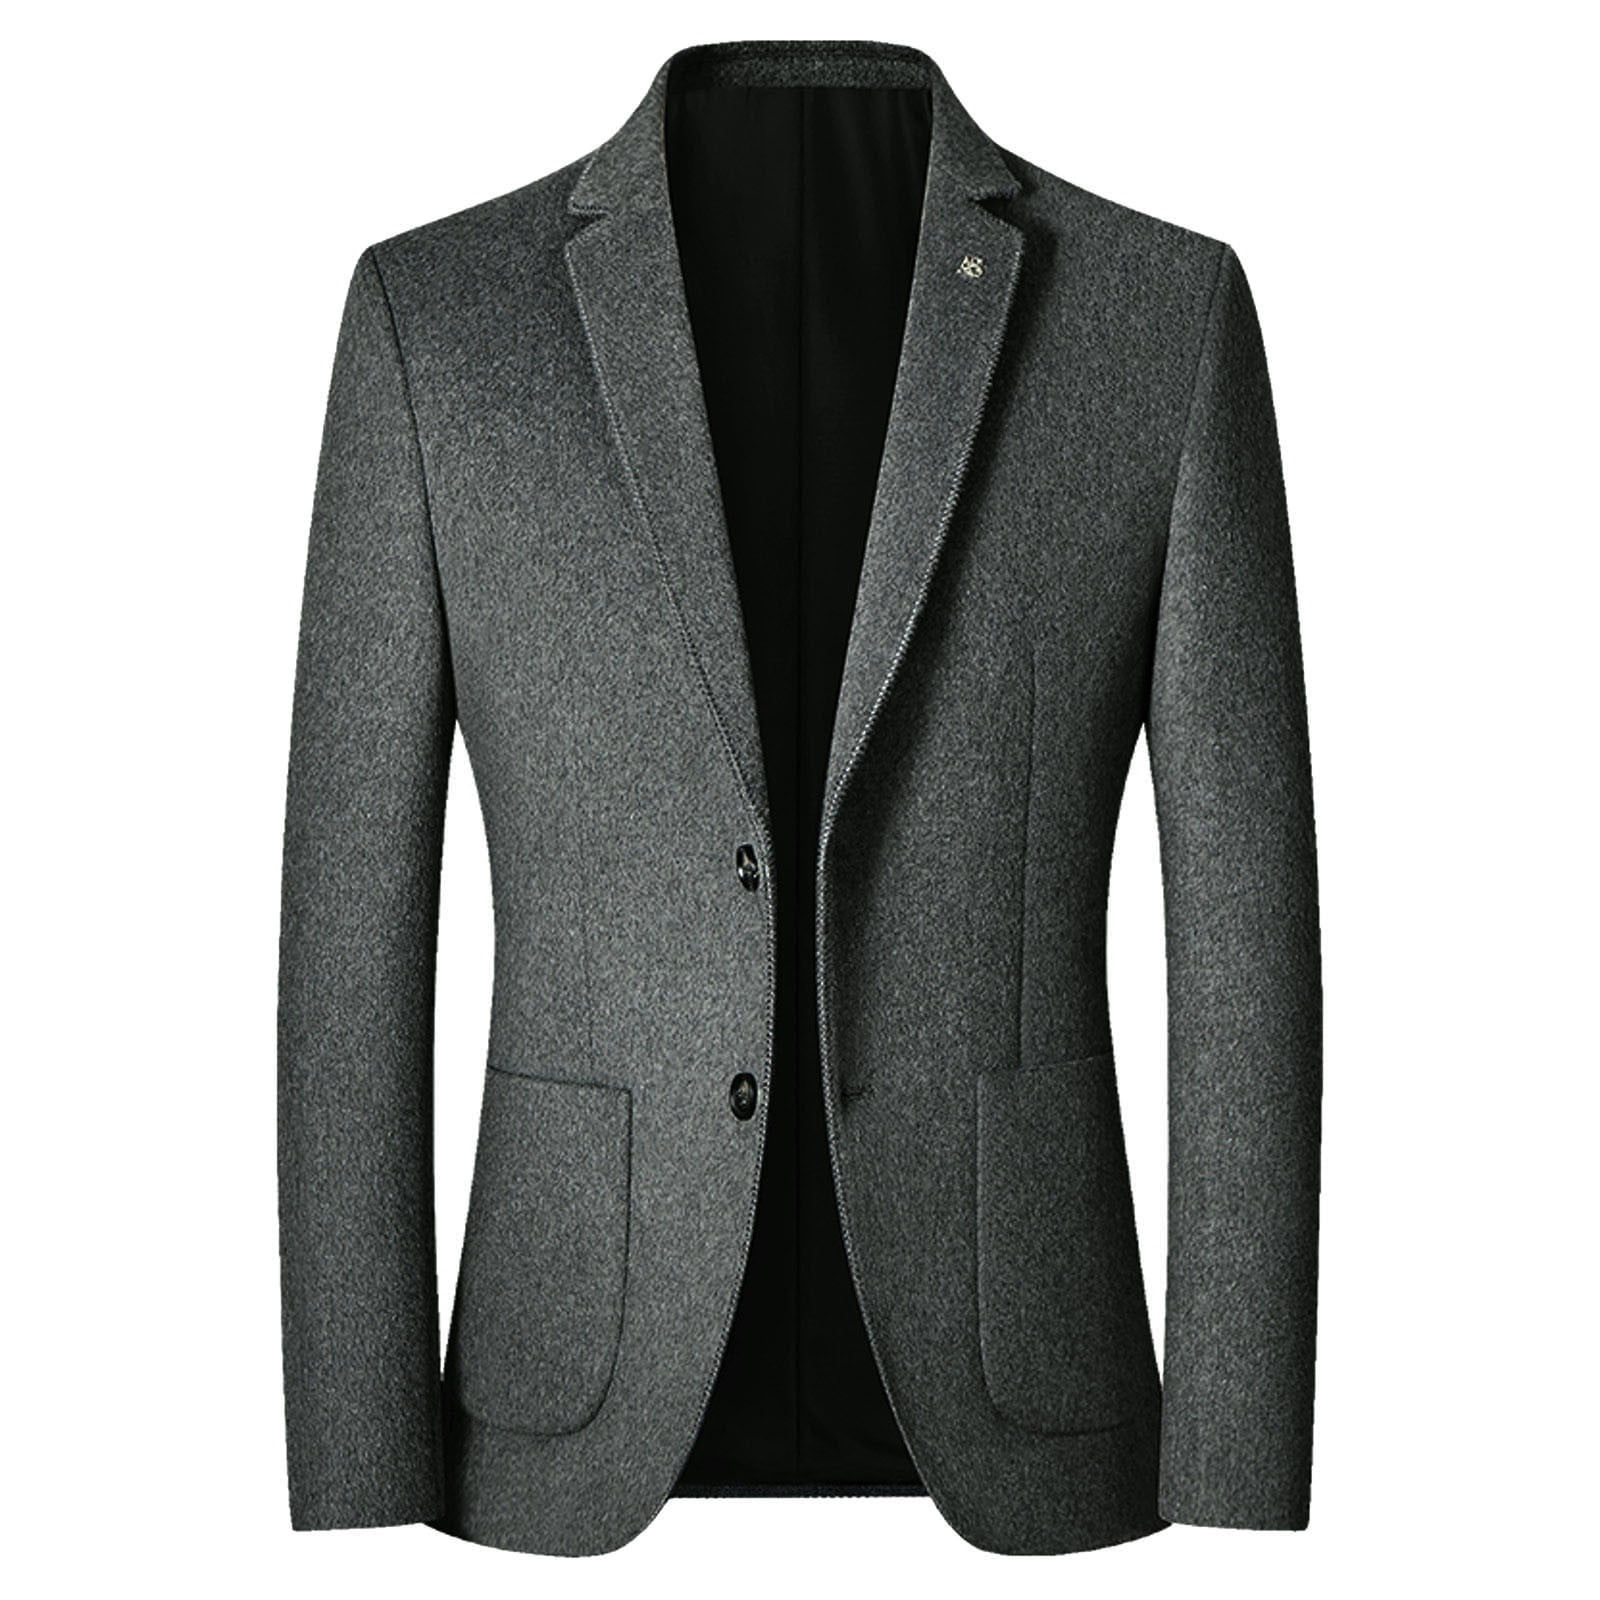 Can you wear a shawl-collered cardigan under a suit or sports jacket? |  Men's Clothing Forums